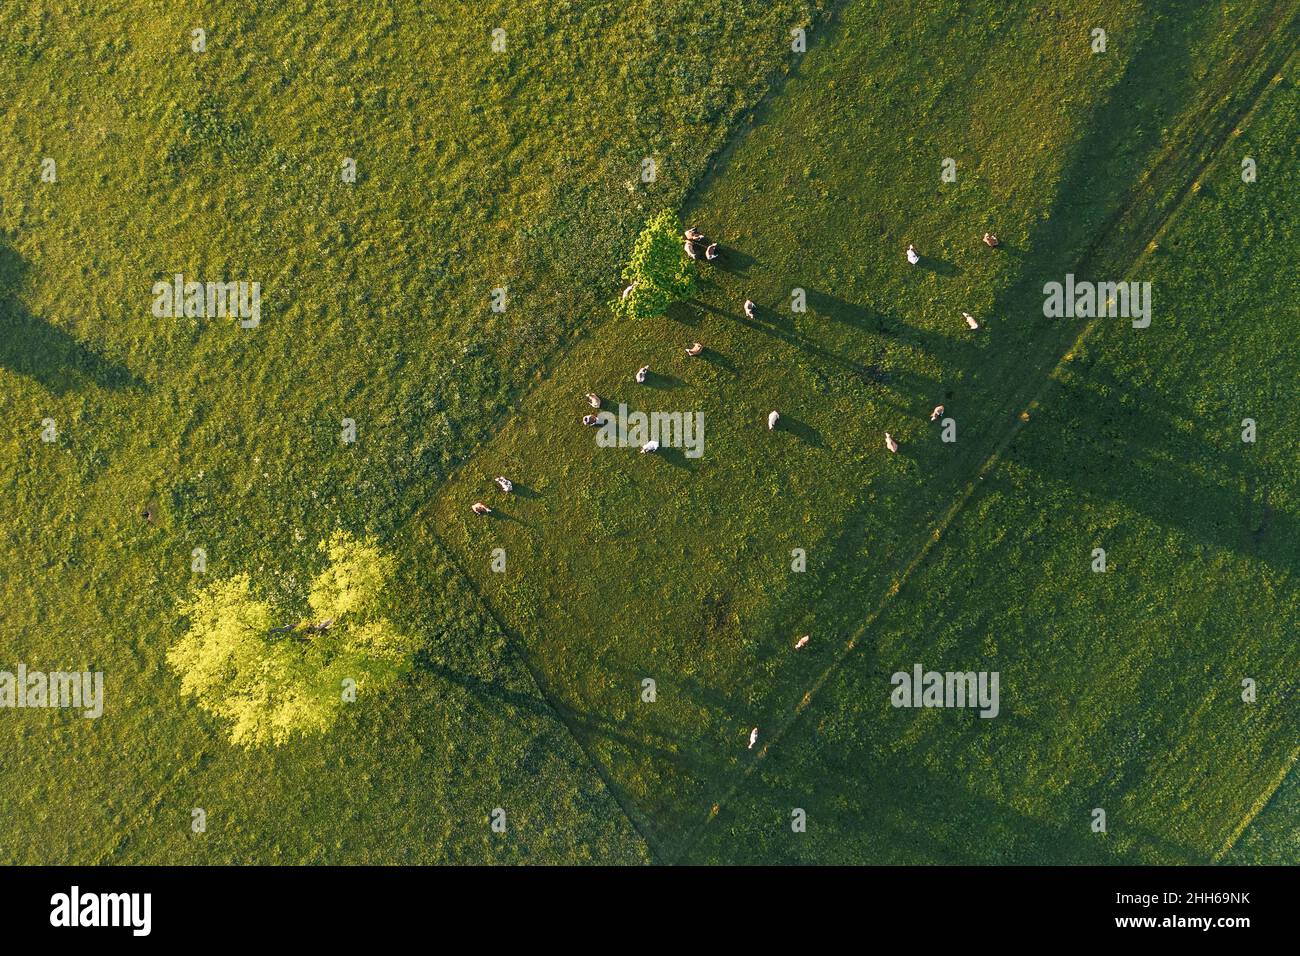 Aerial view of cattle grazing in green pasture Stock Photo